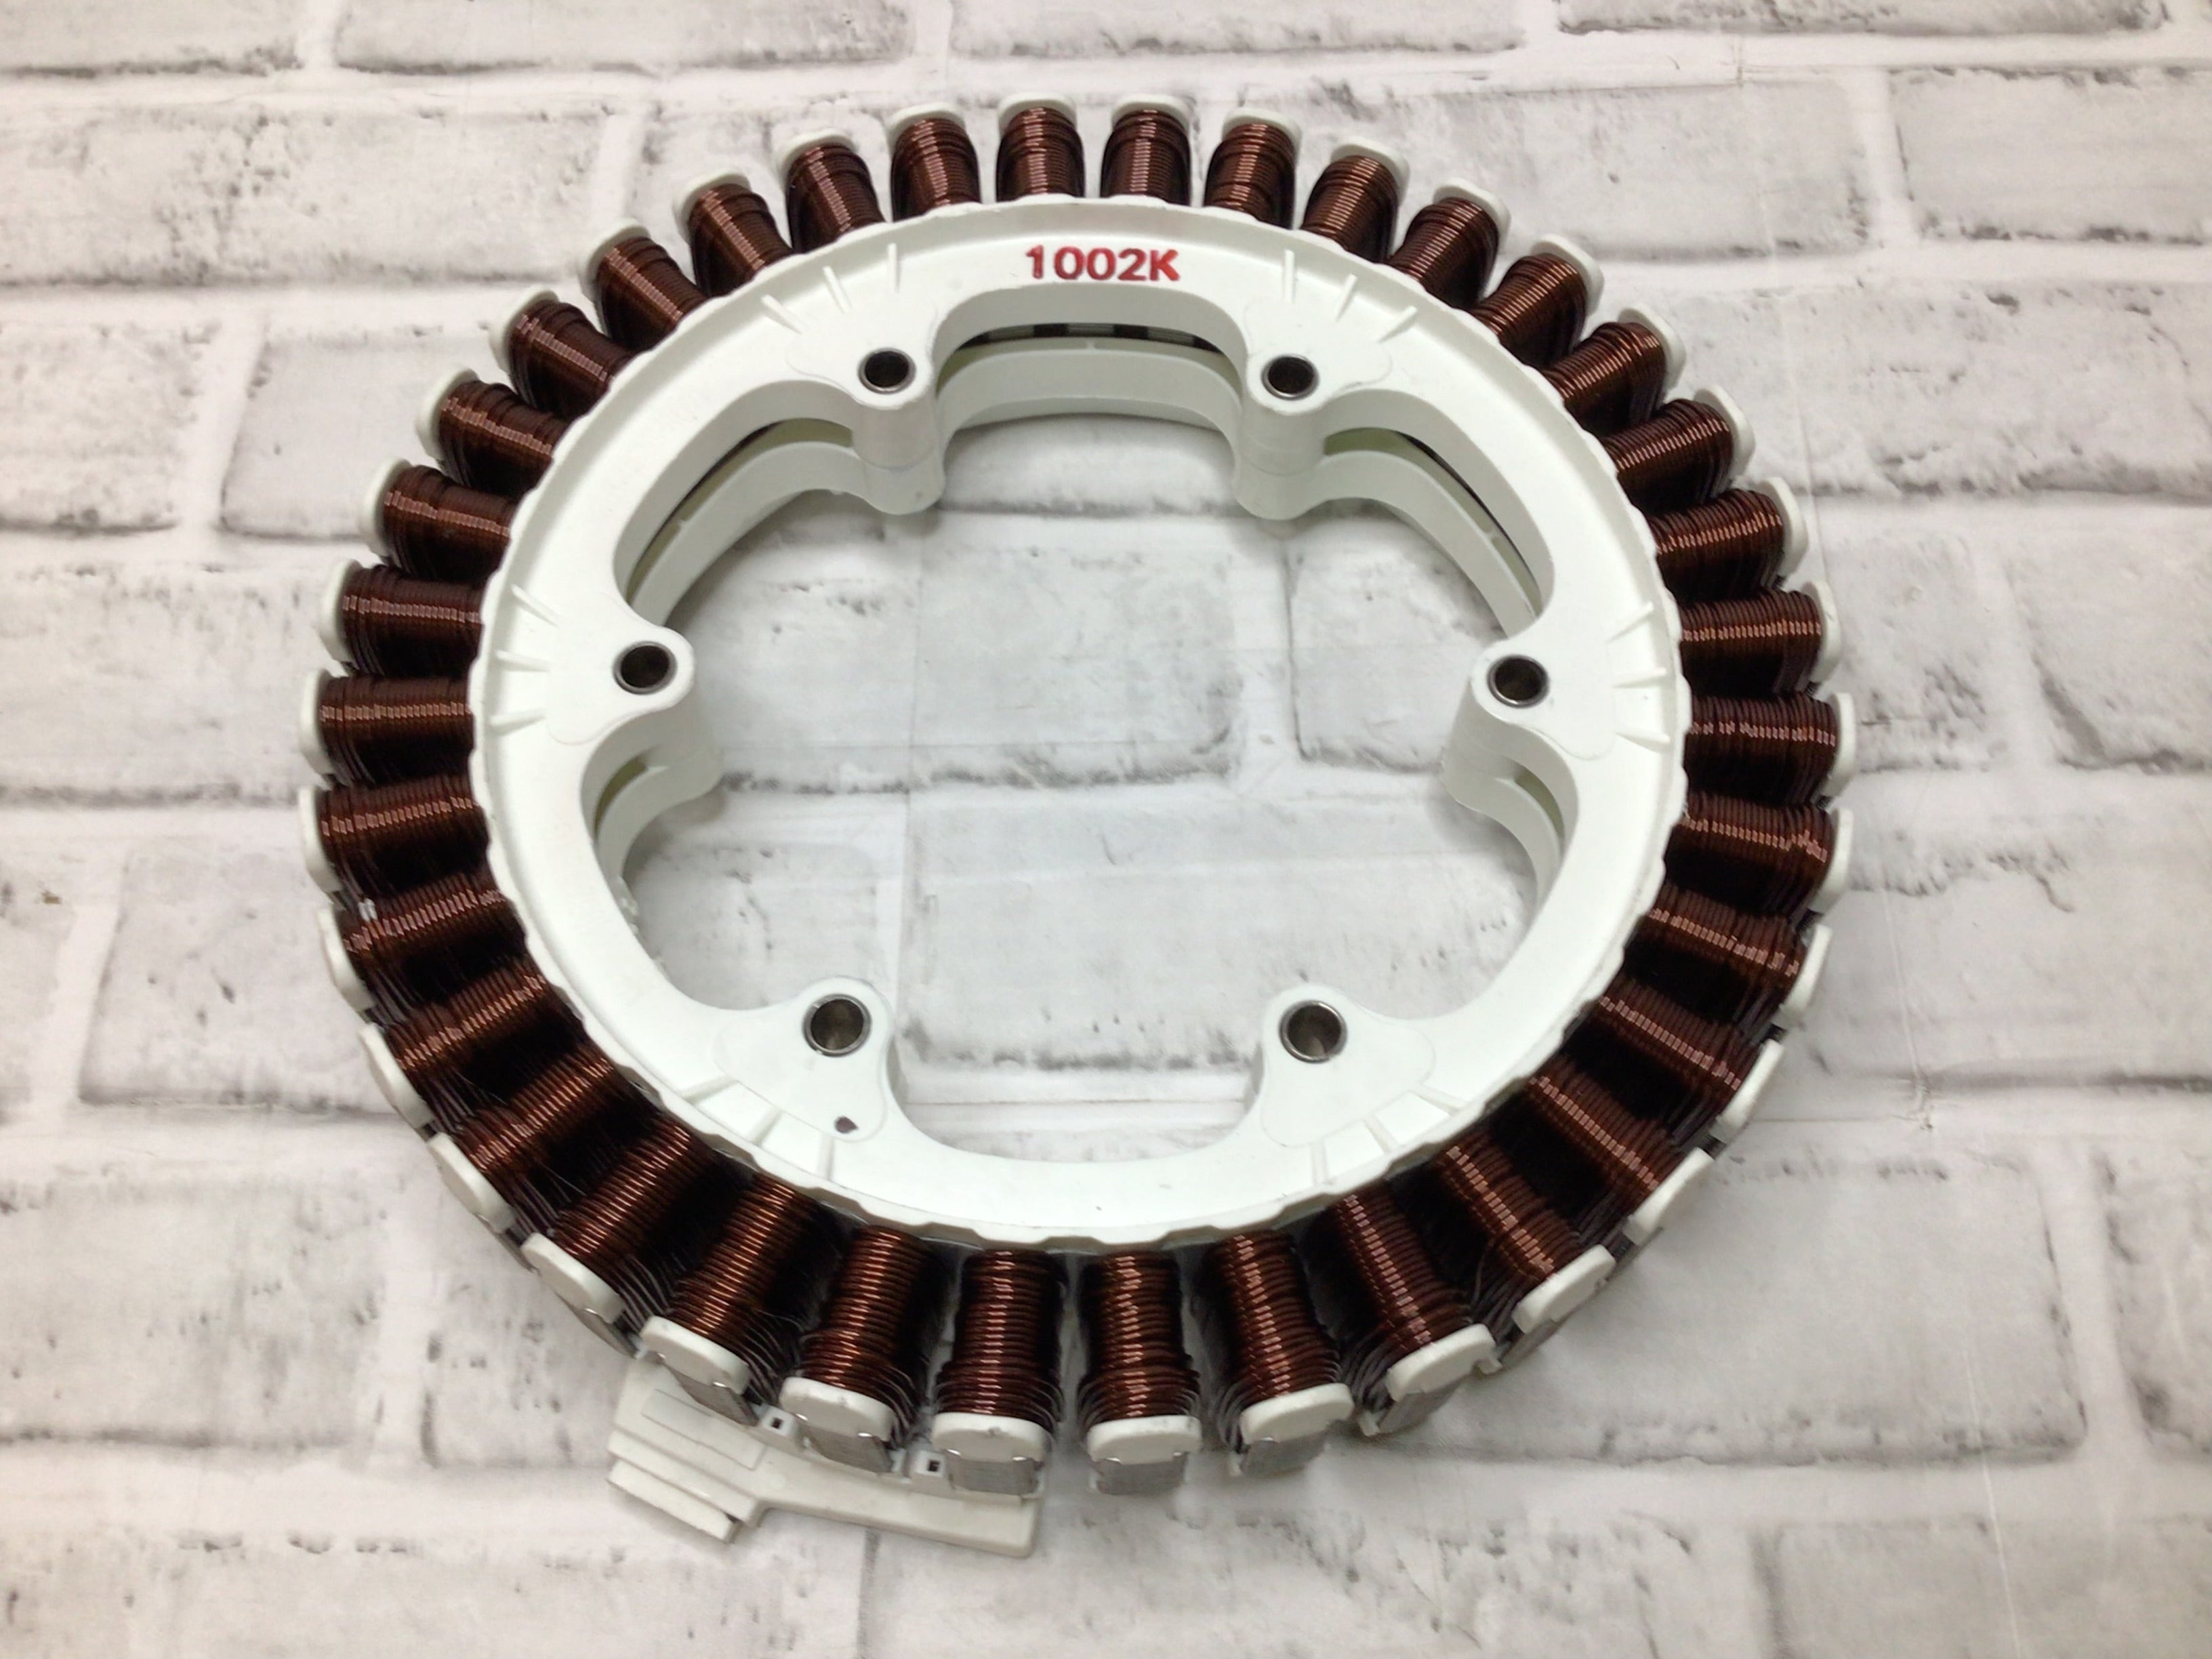 *FOR PARTS / NOT WORKING* LG Washer Motor Stator | 4417EA1002K (8095324700910)